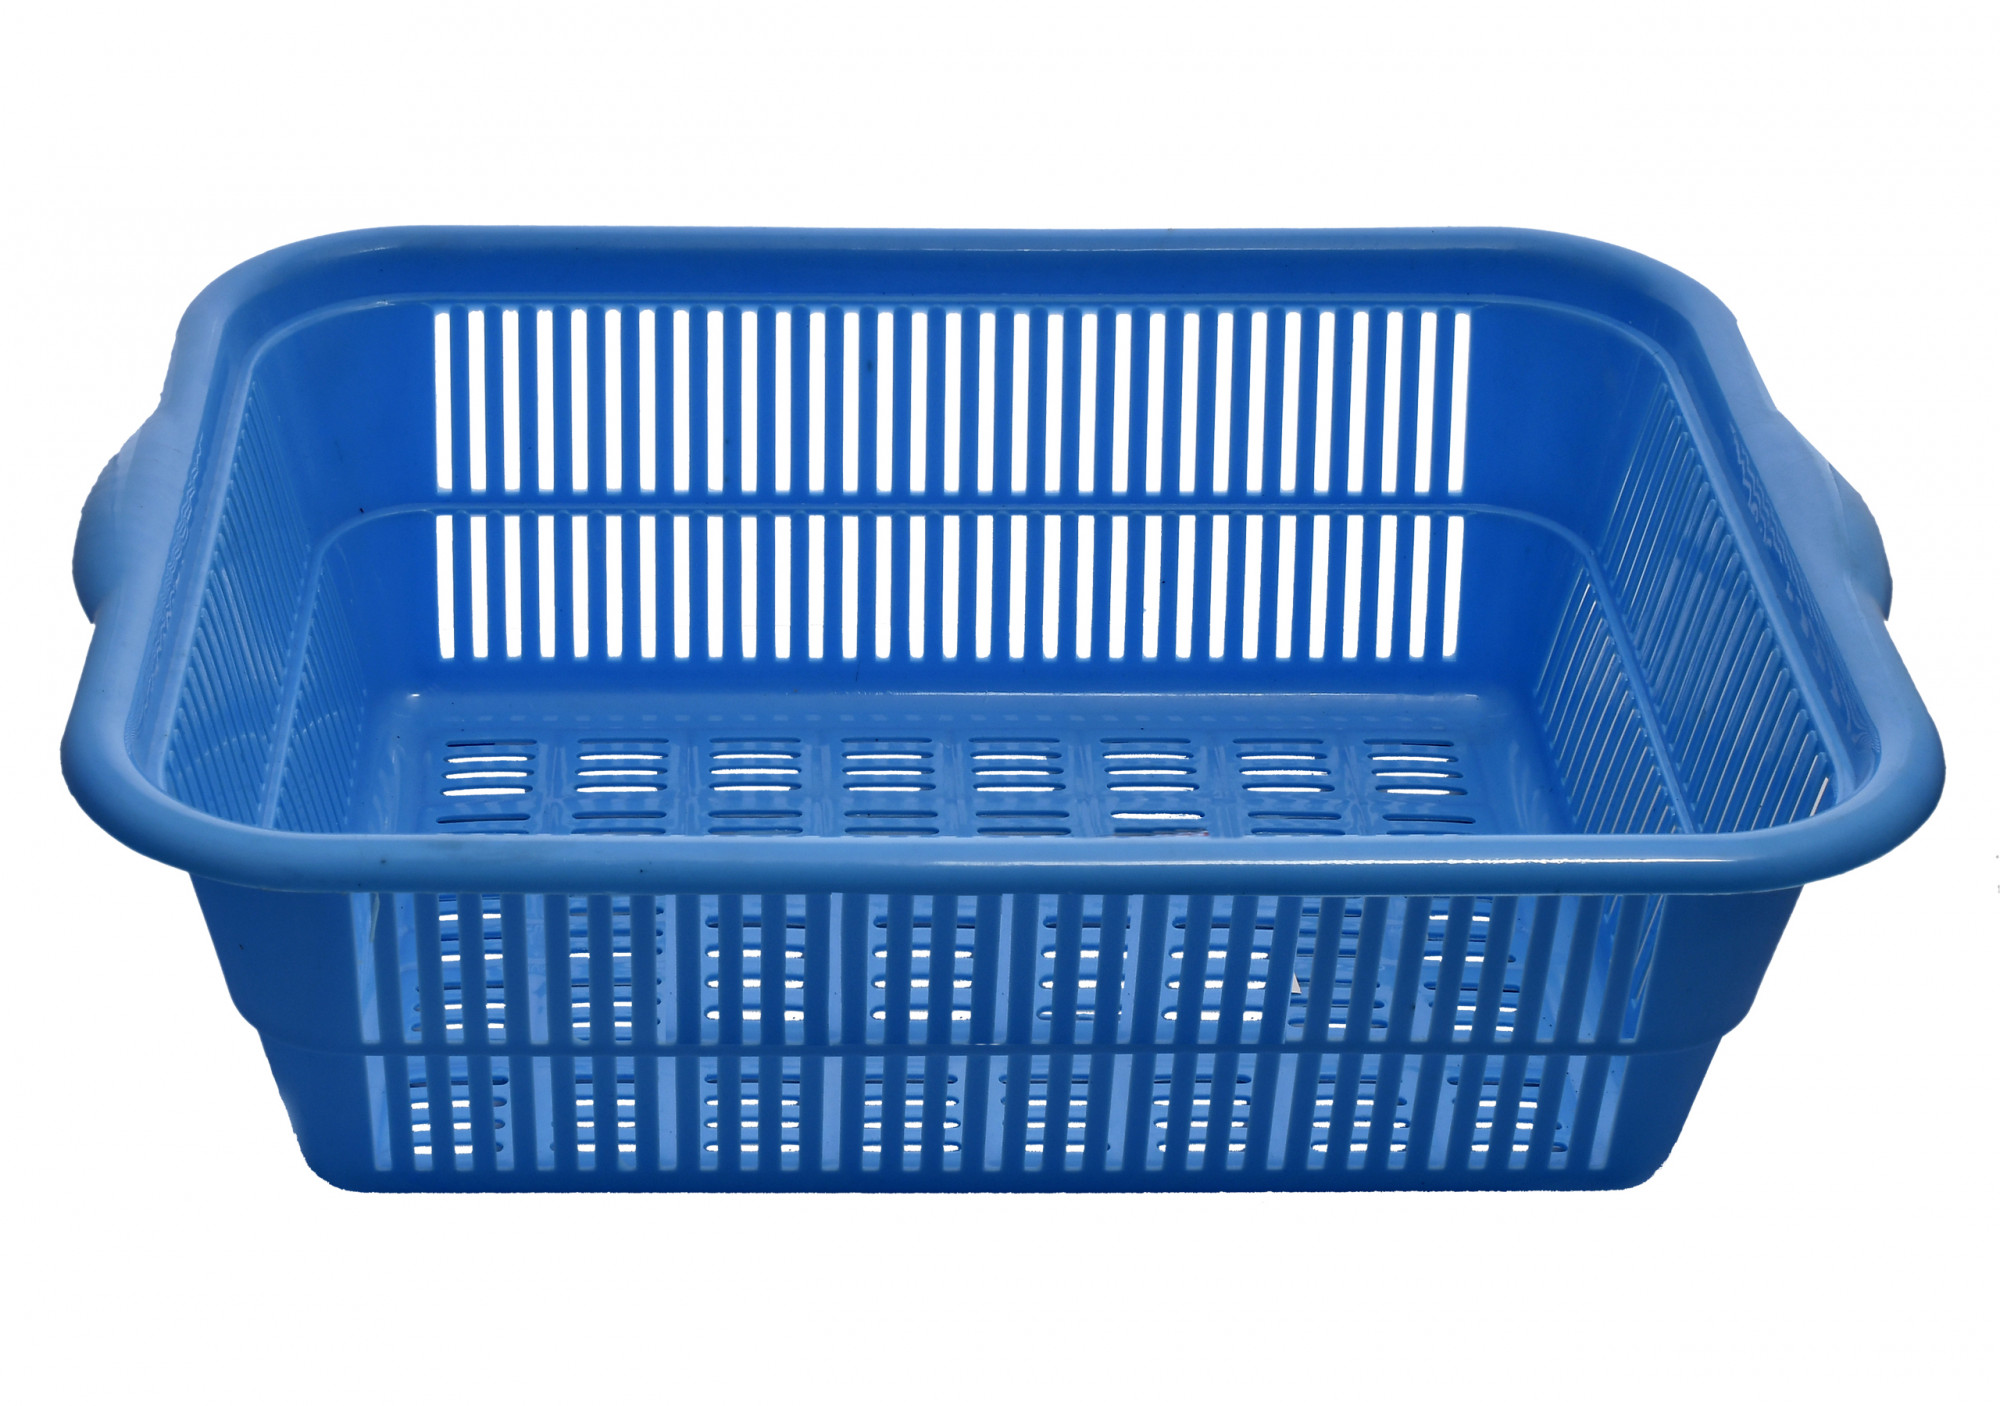 Kuber Industries 4 Pieces Plastic Kitchen Dish Rack Drainer Vegetables And Fruits Basket Dish Rack Multipurpose Organizers ,Small Size,Blue